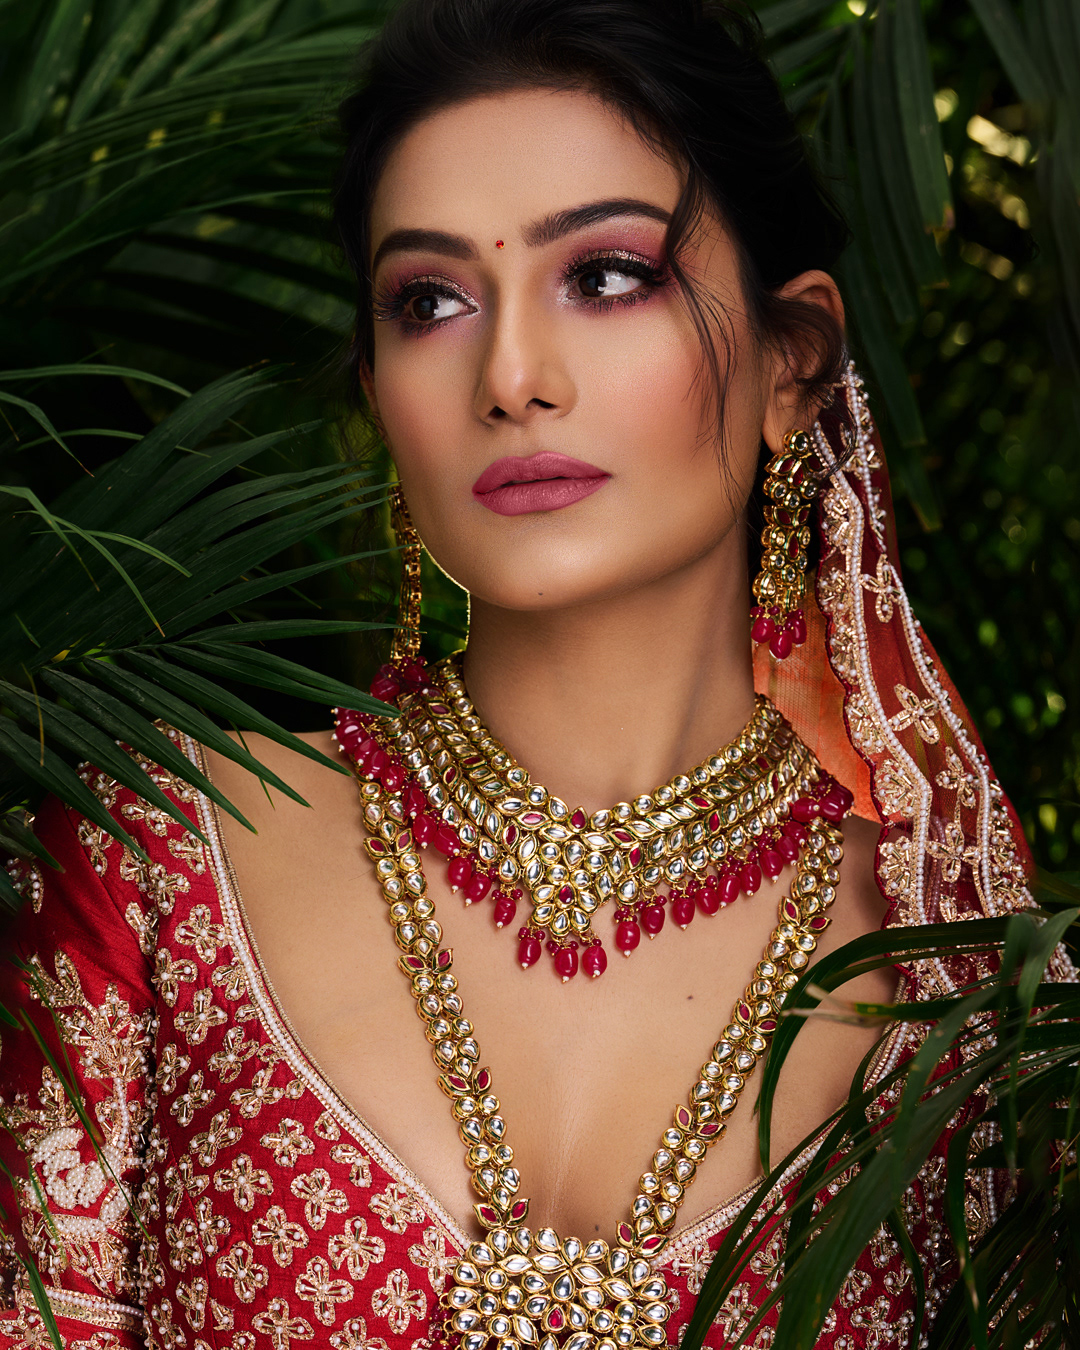 Jewellery Campaign on Behance